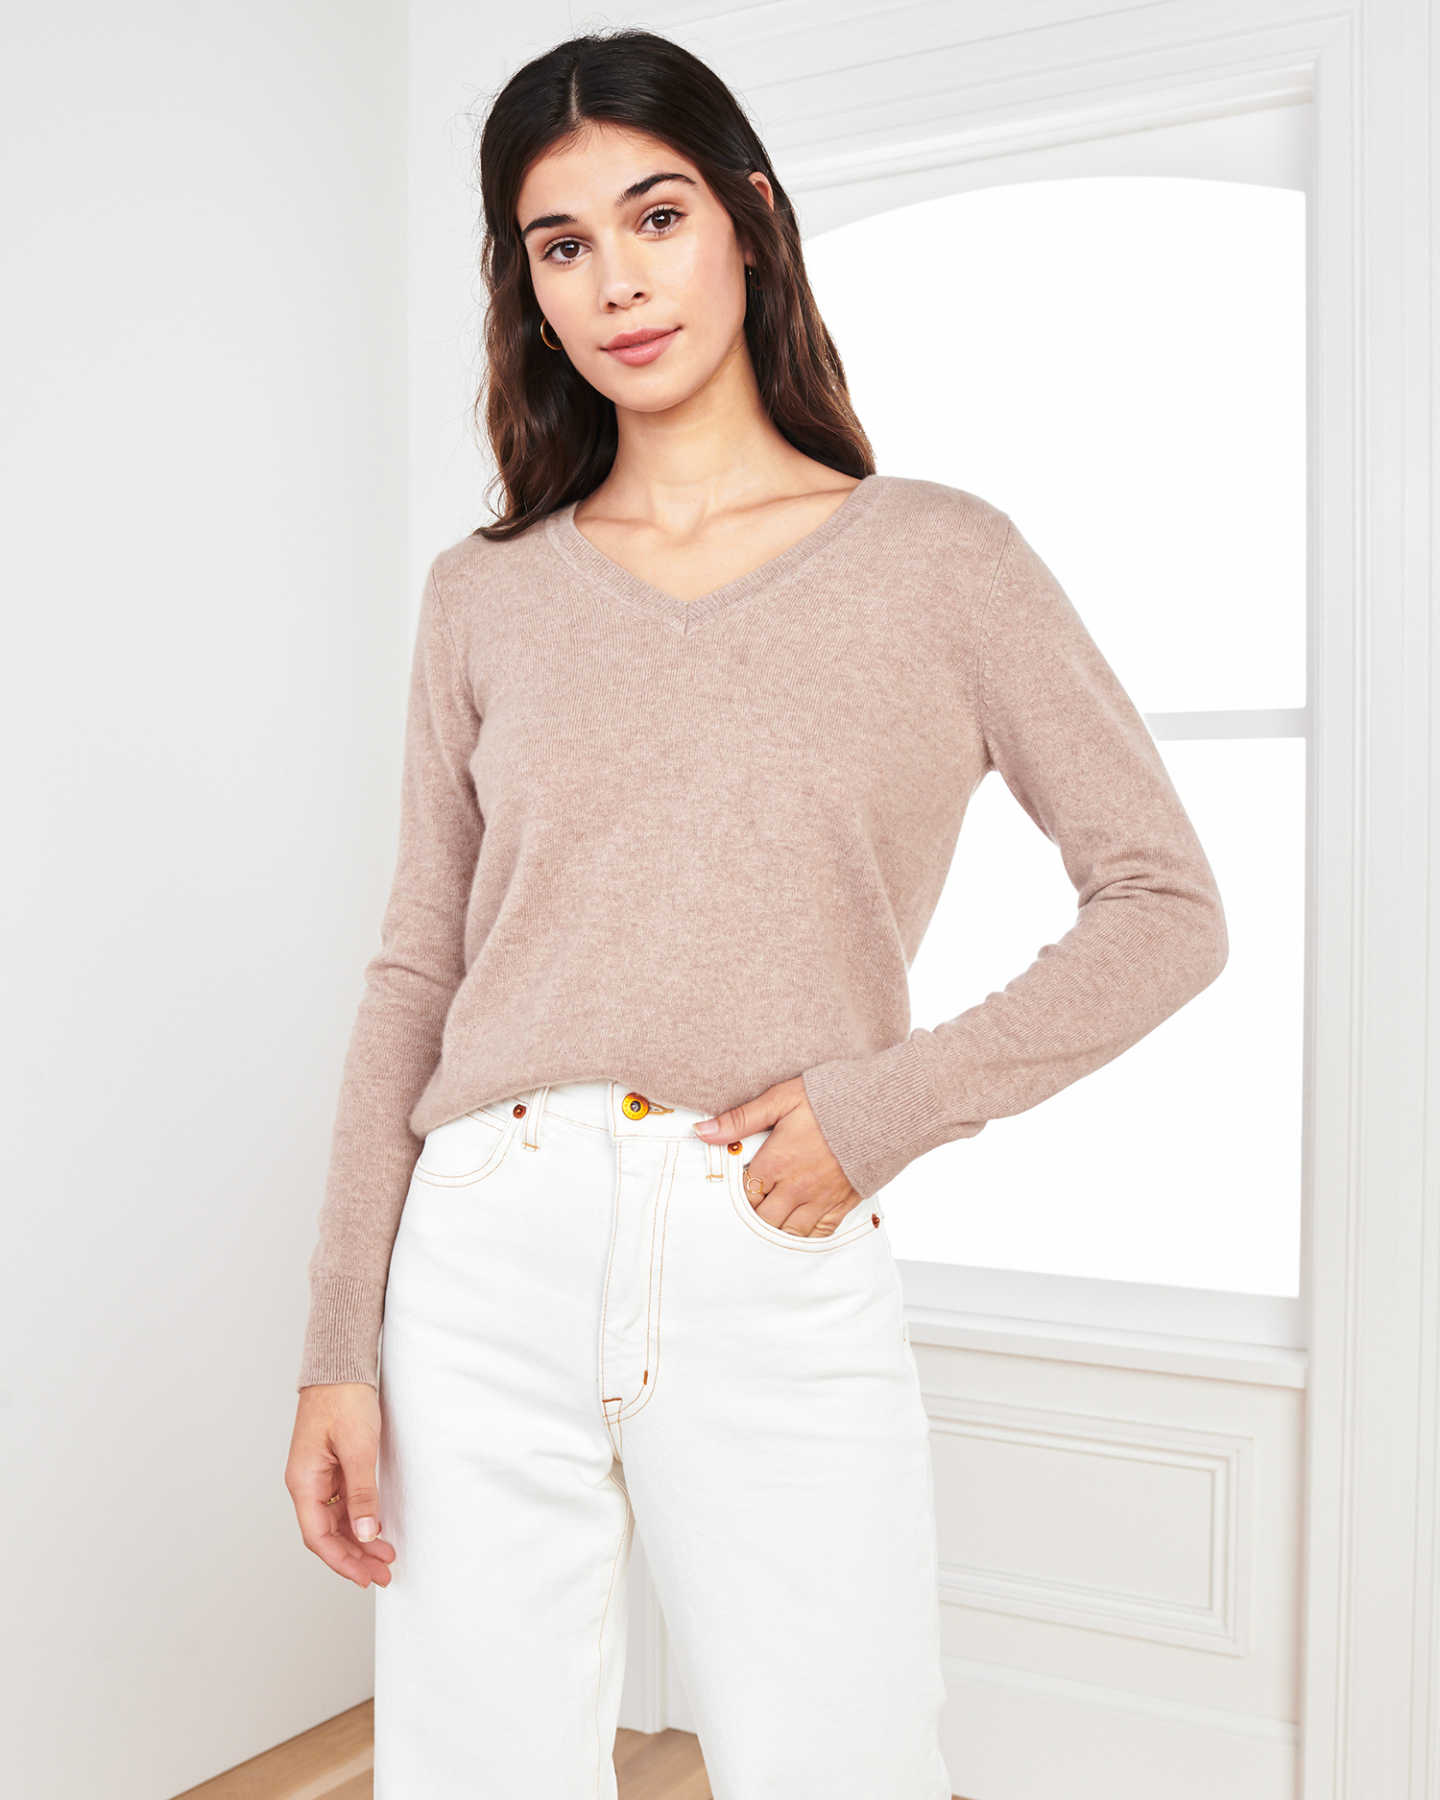 oatmeal cashmere v-neck sweater women standing